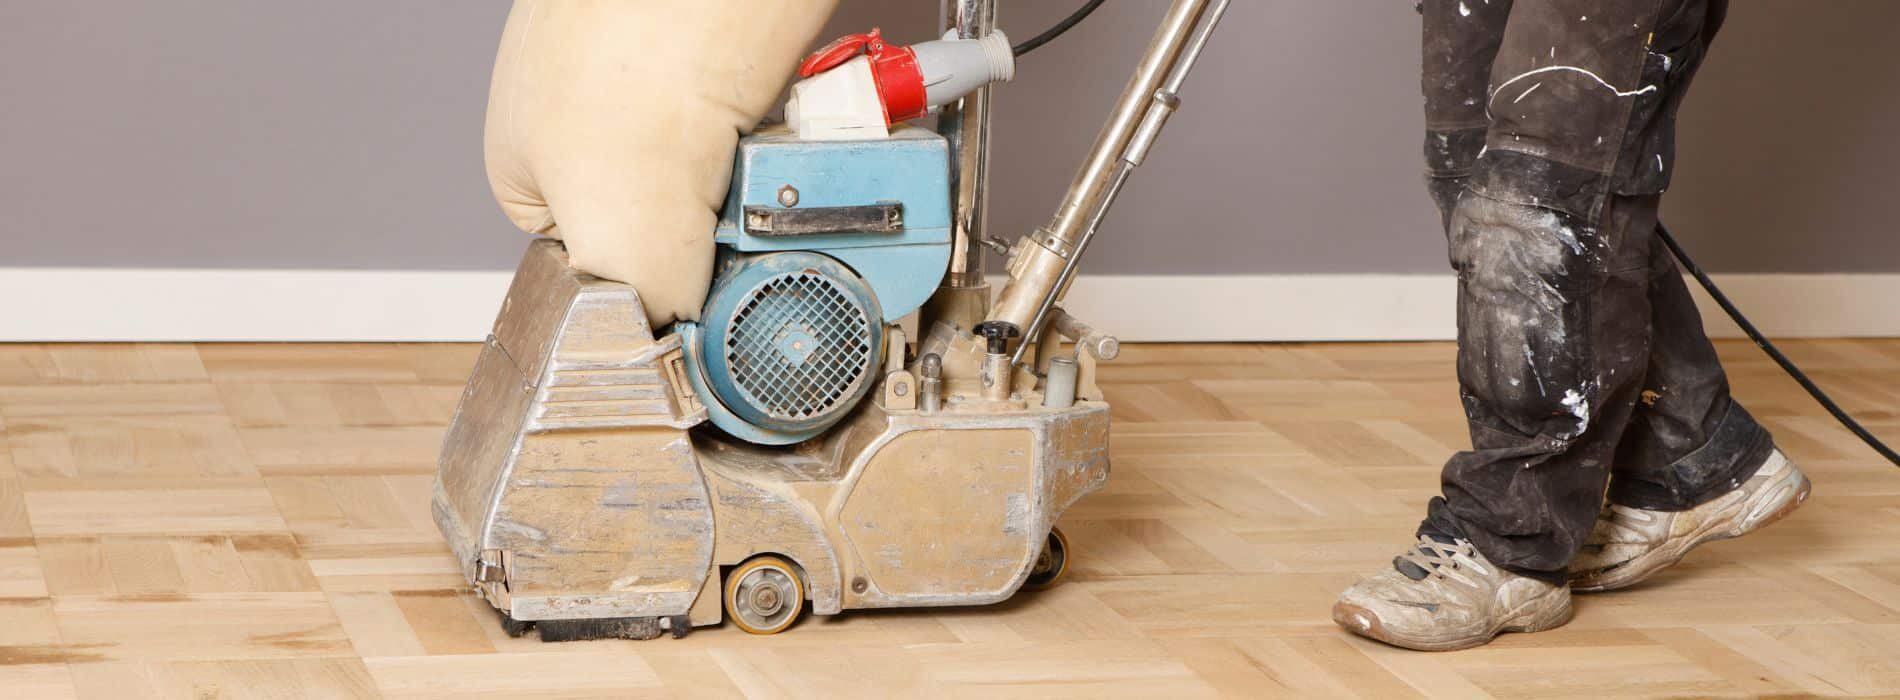 Leveraging the potent 2.2 kW Bona Belt sander, Mr Sander® ensures efficient parquet floor restoration. Our process, featuring an integrated HEPA-filtered dust extraction system, guarantees minimal airborne dust and an impeccably clean finish.